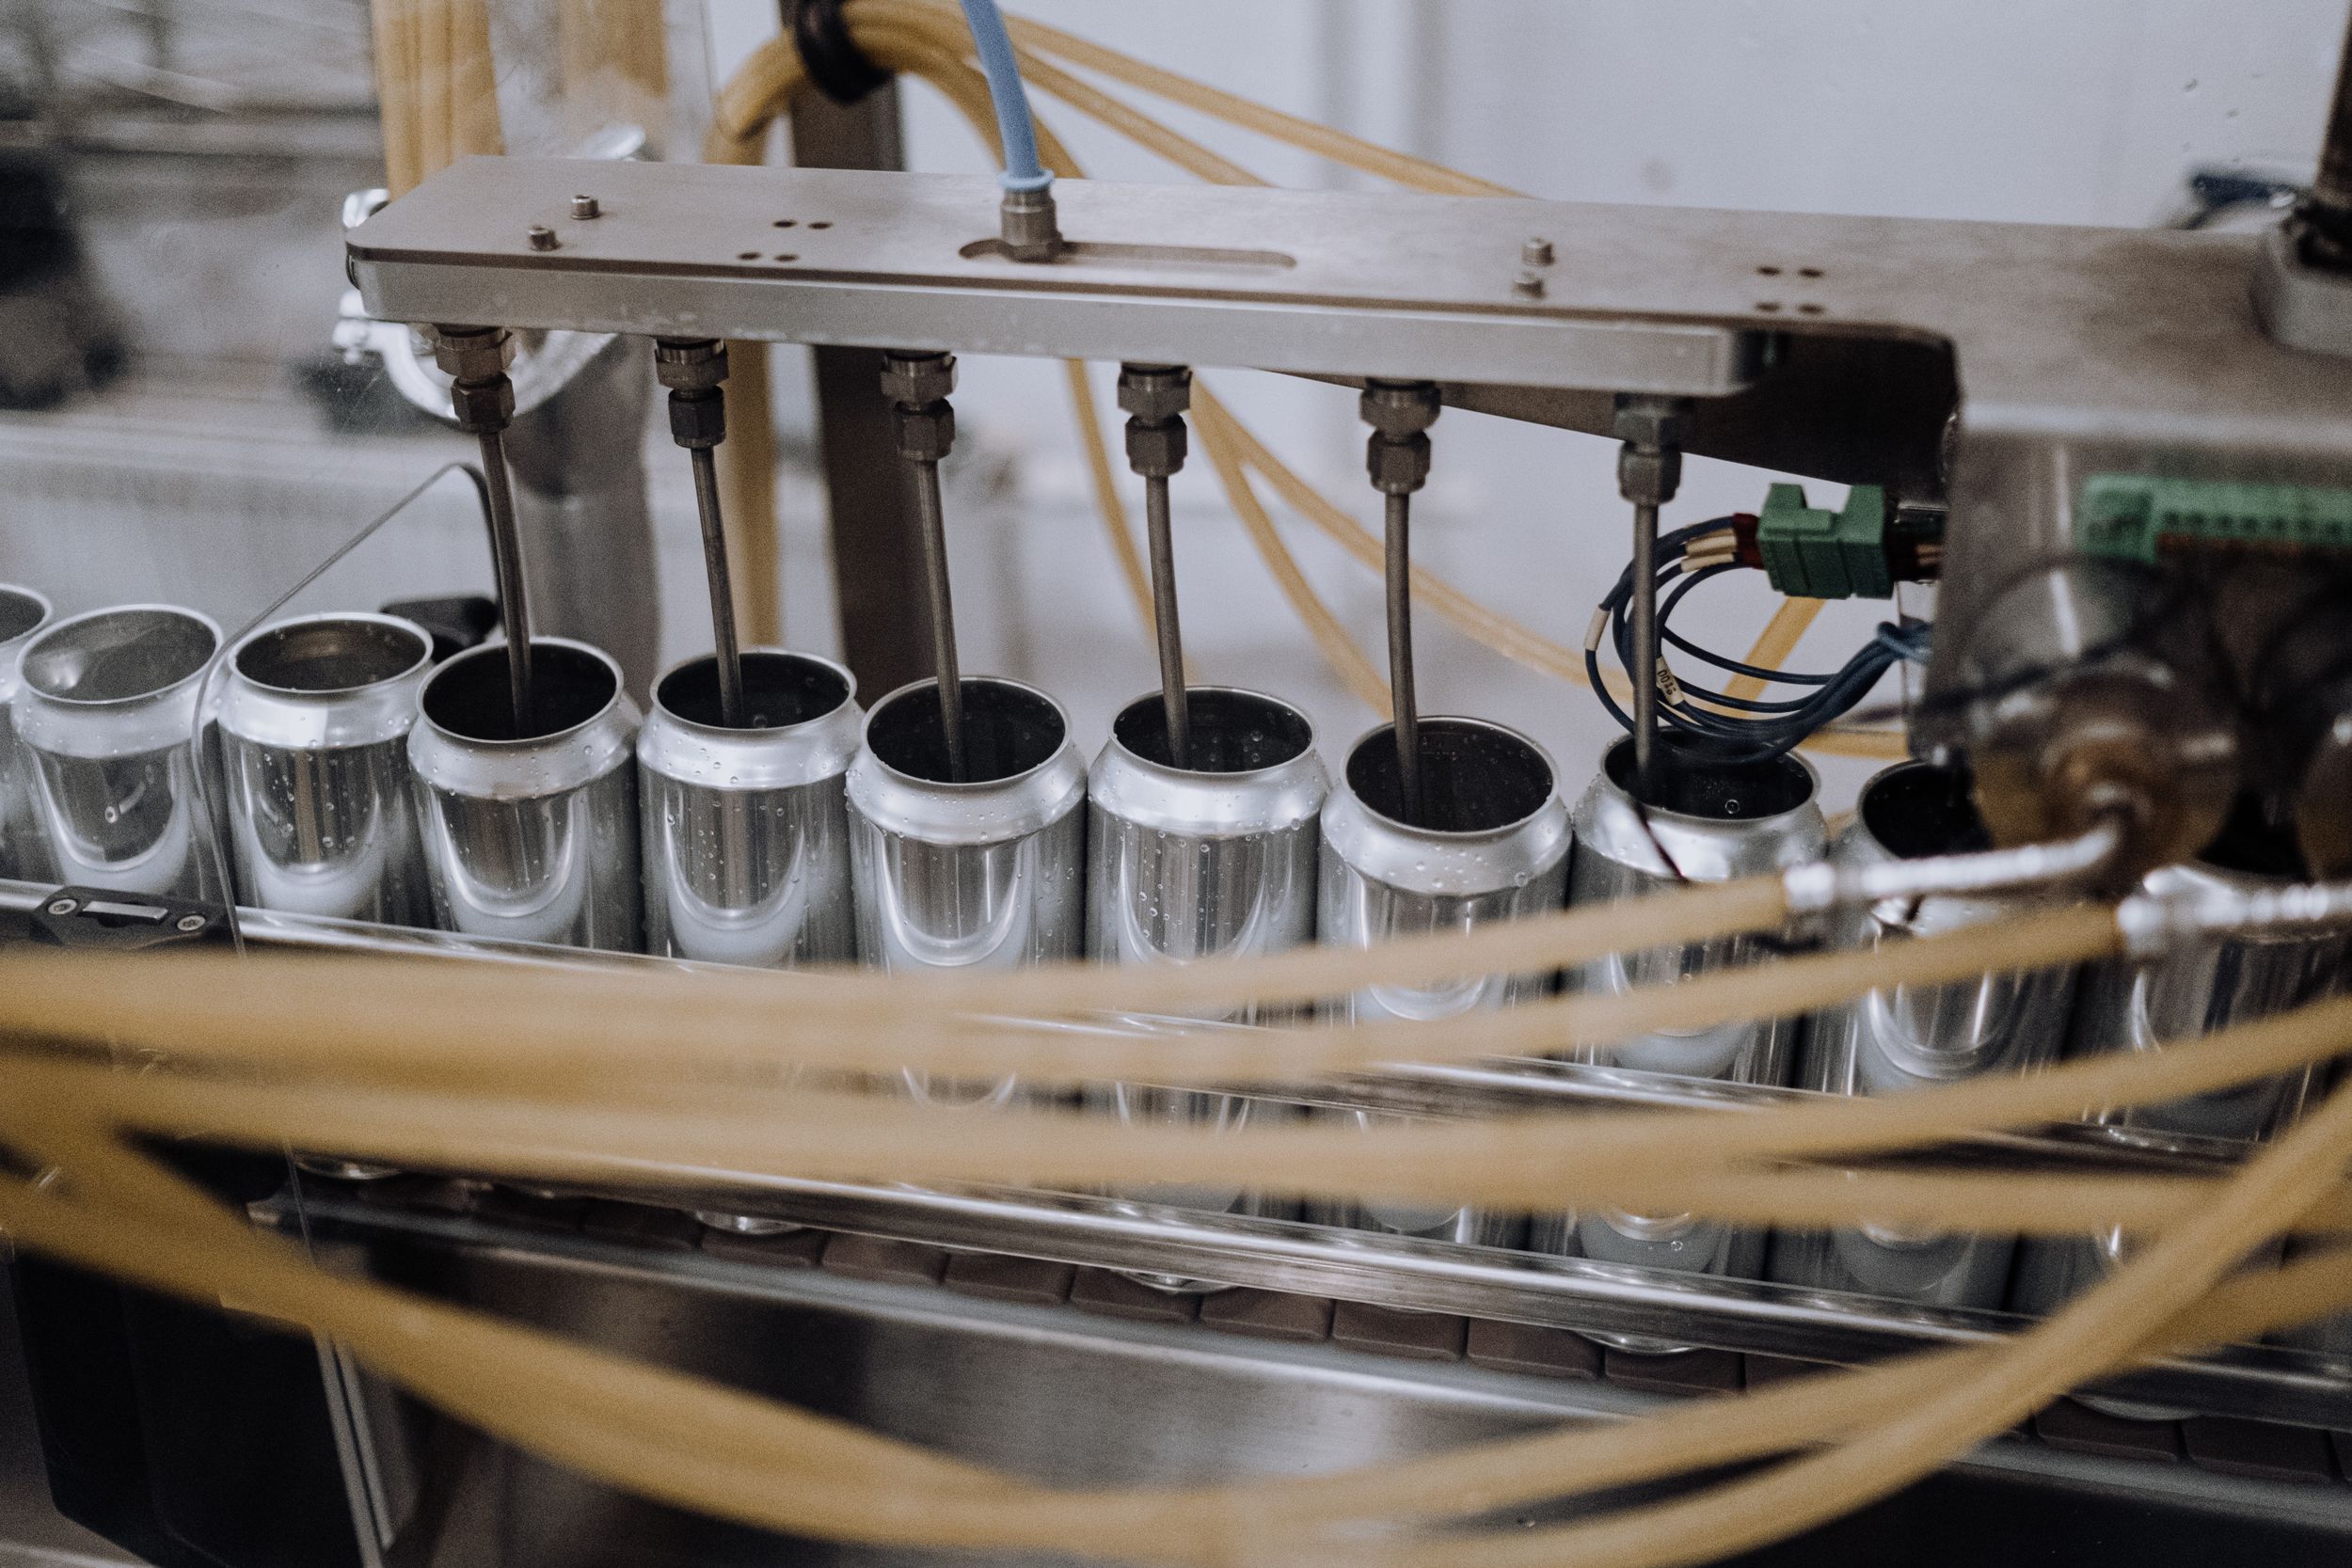 Robotic arms filling cans of soda.